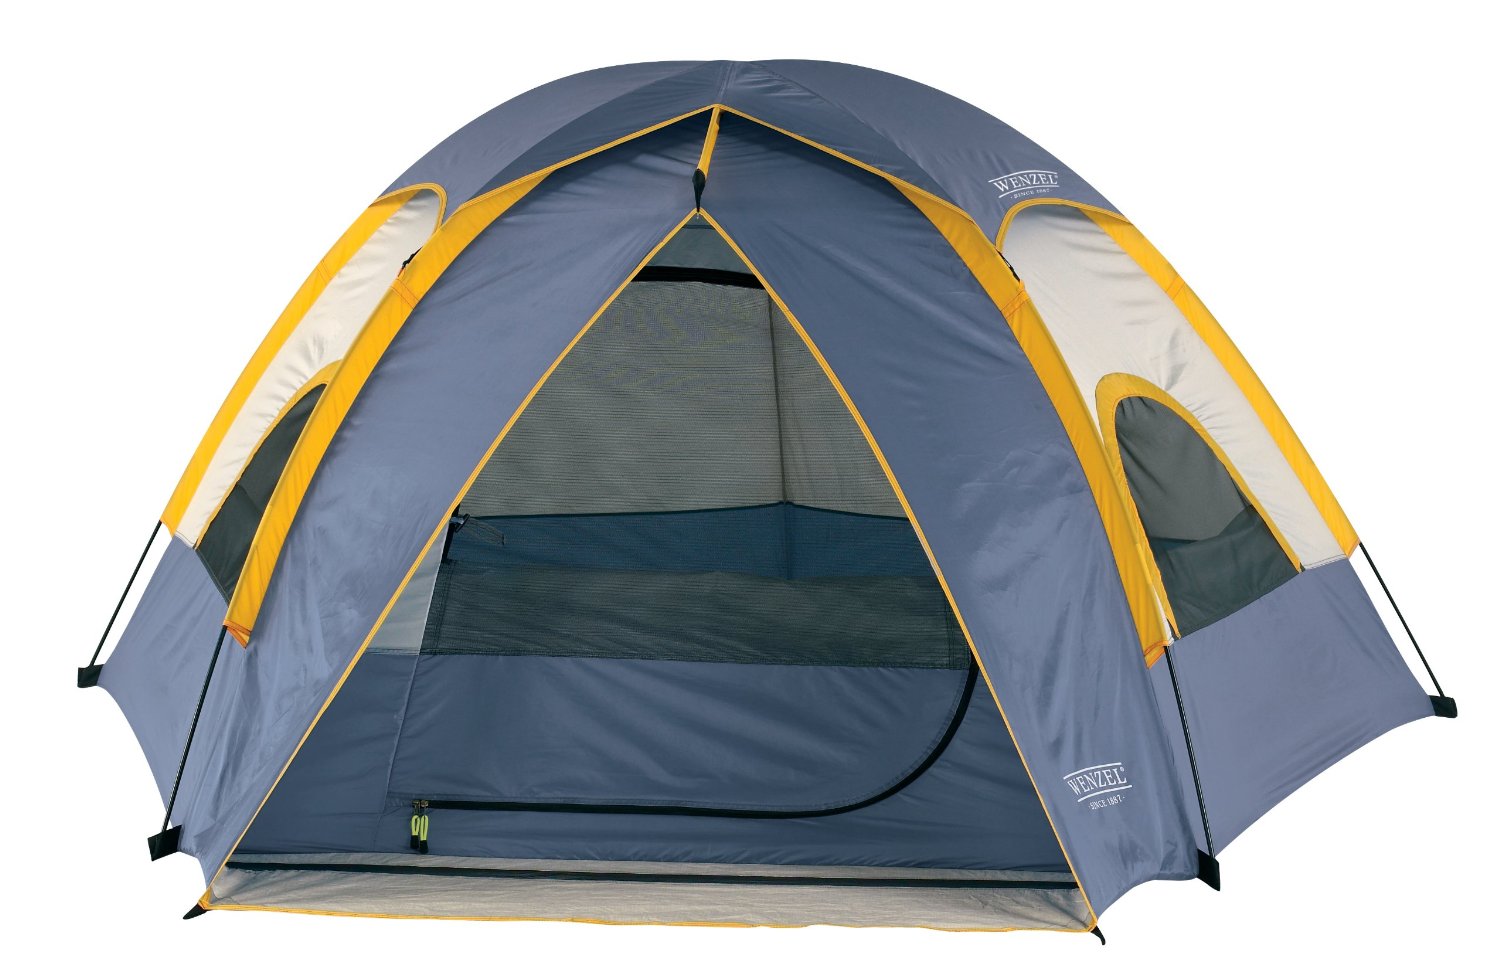 Top 10 Best Camping Tents